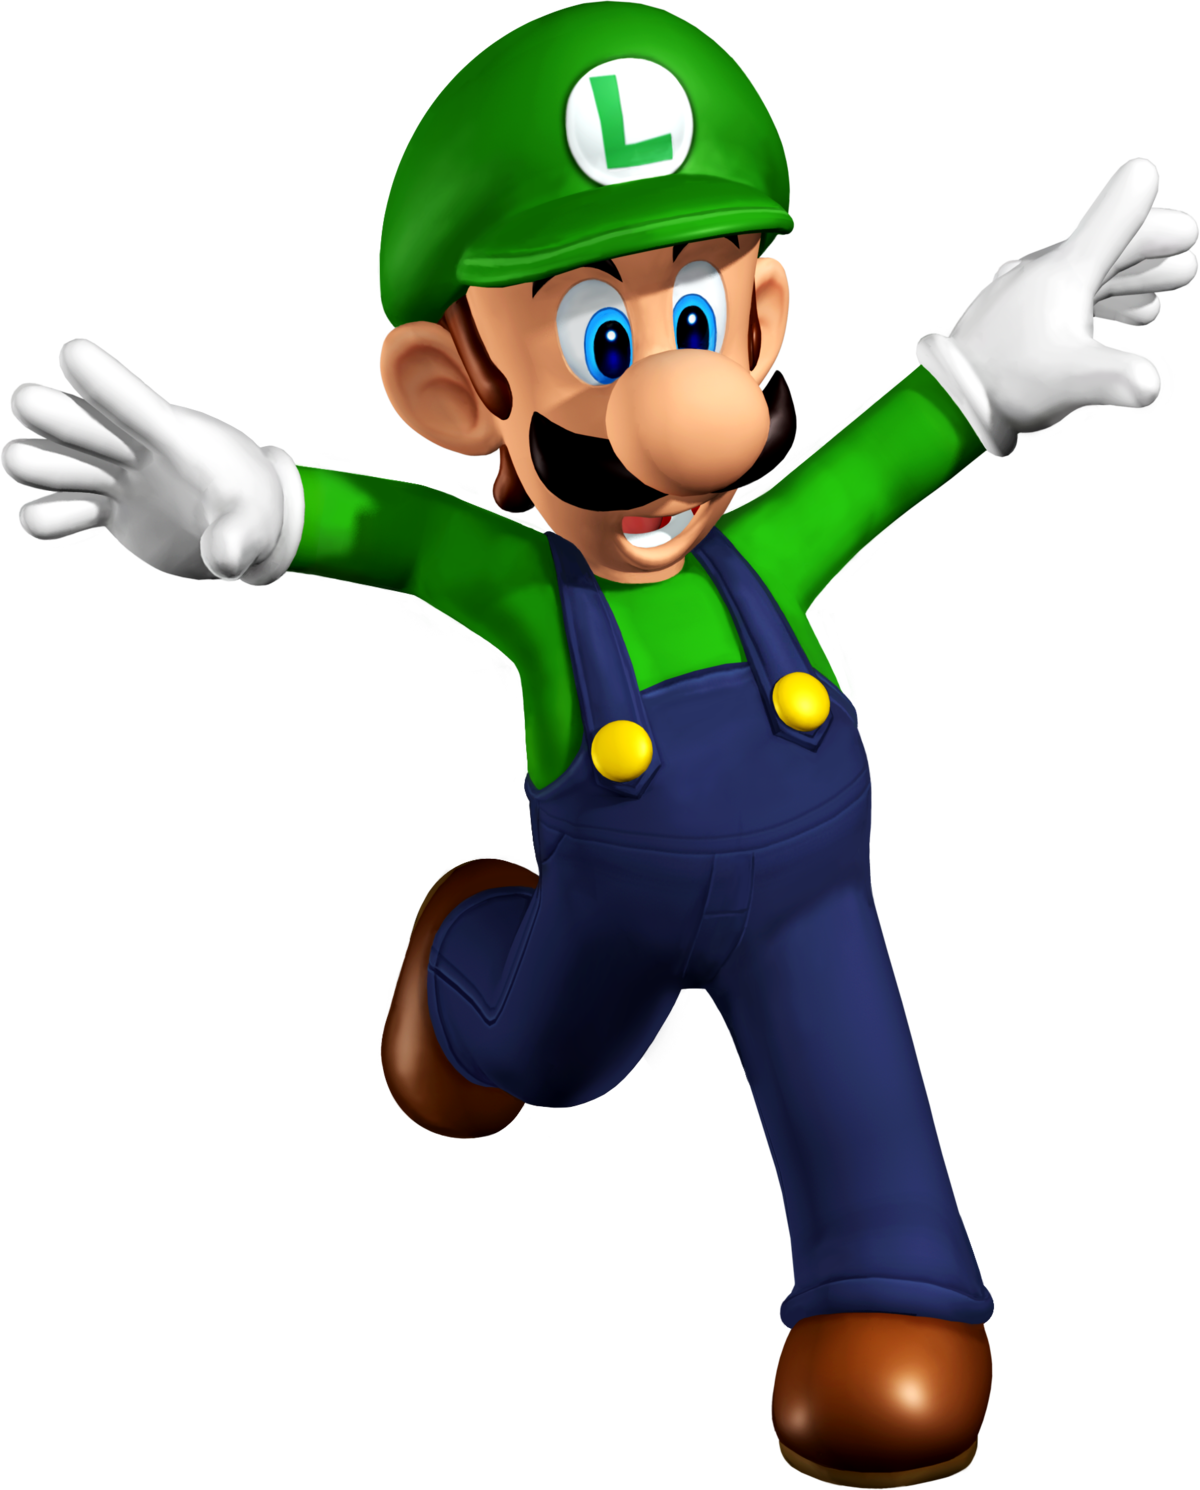 https://mario.wiki.gallery/images/thumb/f/f5/Luigi_Artwork_-_Super_Mario_64_DS.png/1200px-Luigi_Artwork_-_Super_Mario_64_DS.png